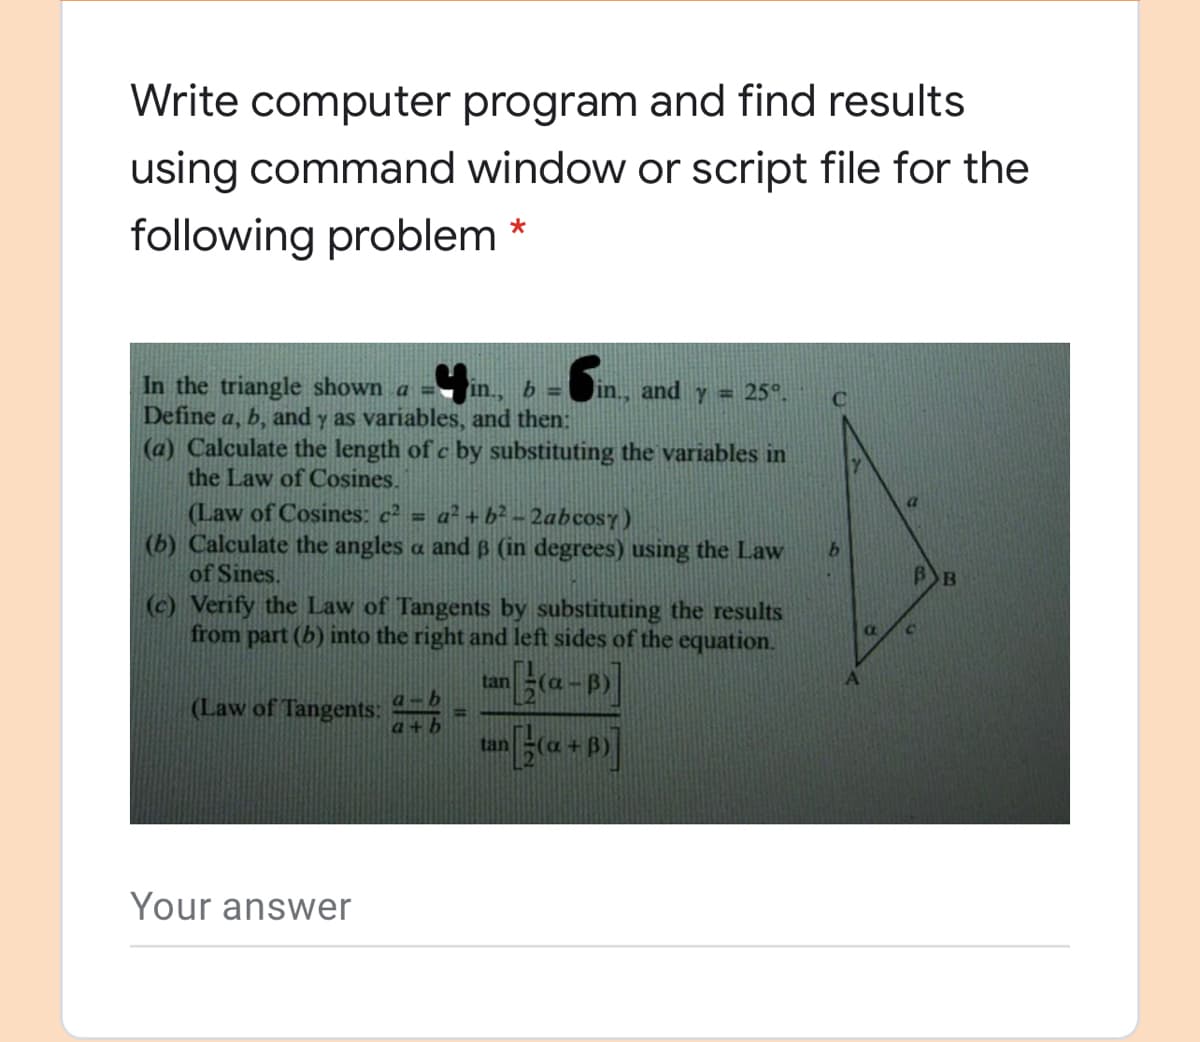 Write computer program and find results
using command window or script file for the
following problem *
In the triangle shown a =
Define a, b, and y as variables, and then:
(a) Calculate the length of c by substituting the variables in
the Law of Cosines.
in.,
b =
in., and y = 25°.
(Law of Cosines: c² = a² + b² - 2abcosy)
(b) Calculate the angles a and B (in degrees) using the Law
of Sines.
(c) Verify the Law of Tangents by substituting the results
from part (b) into the right and left sides of the equation.
C.
tan
(Law of Tangents:
tan
Your answer
